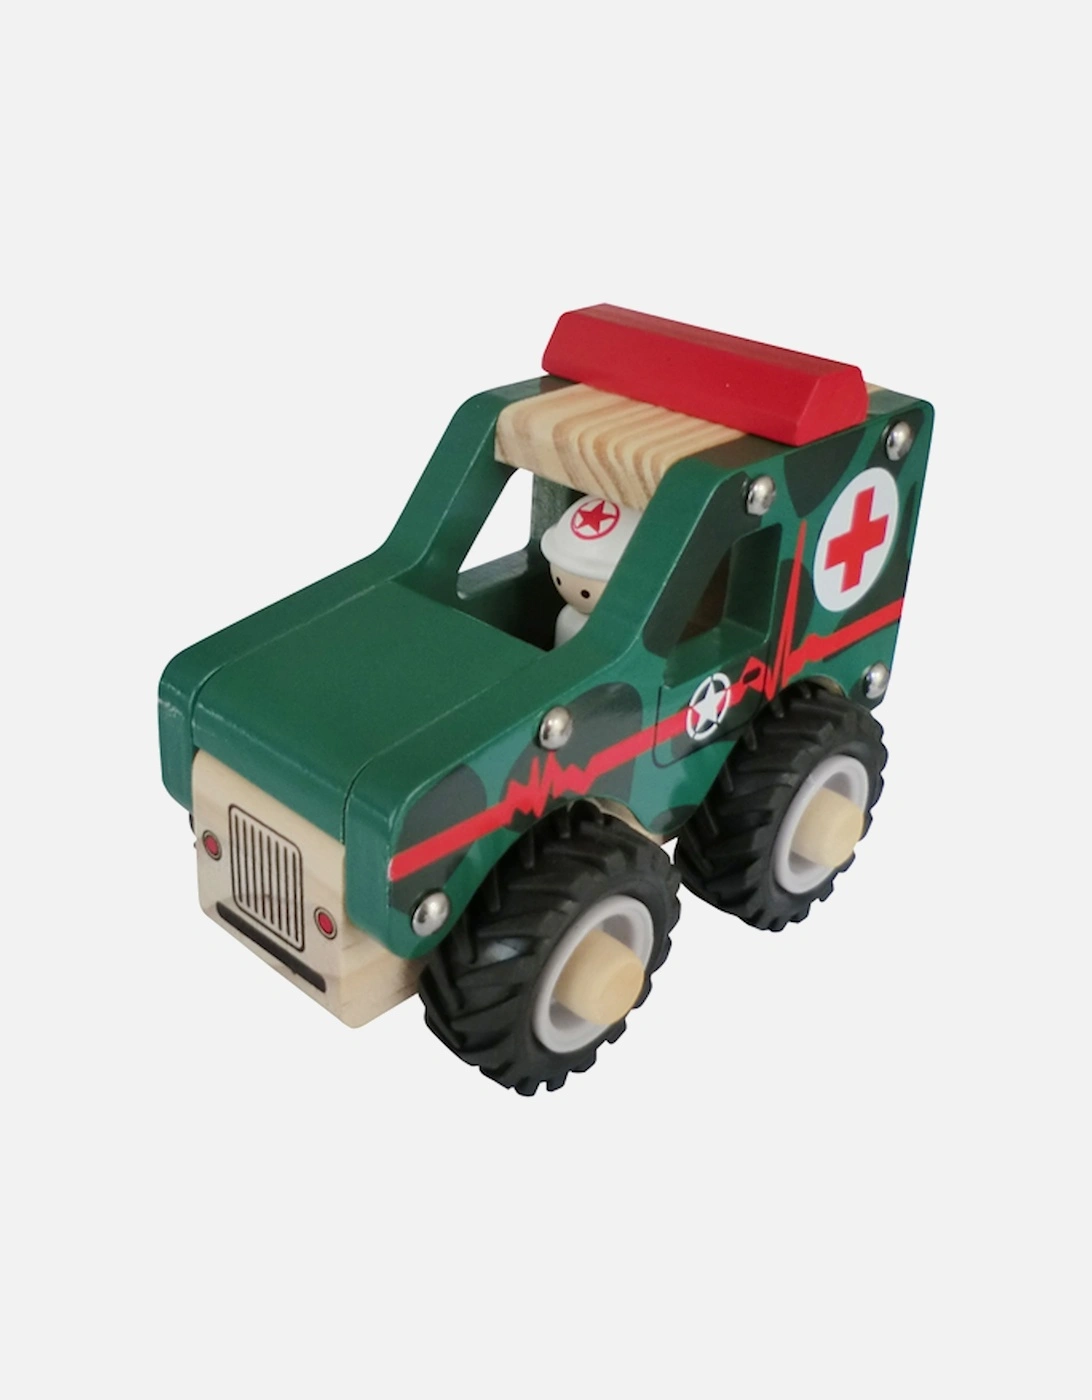 Wooden Brrm-Brrms Emergency Vehicles